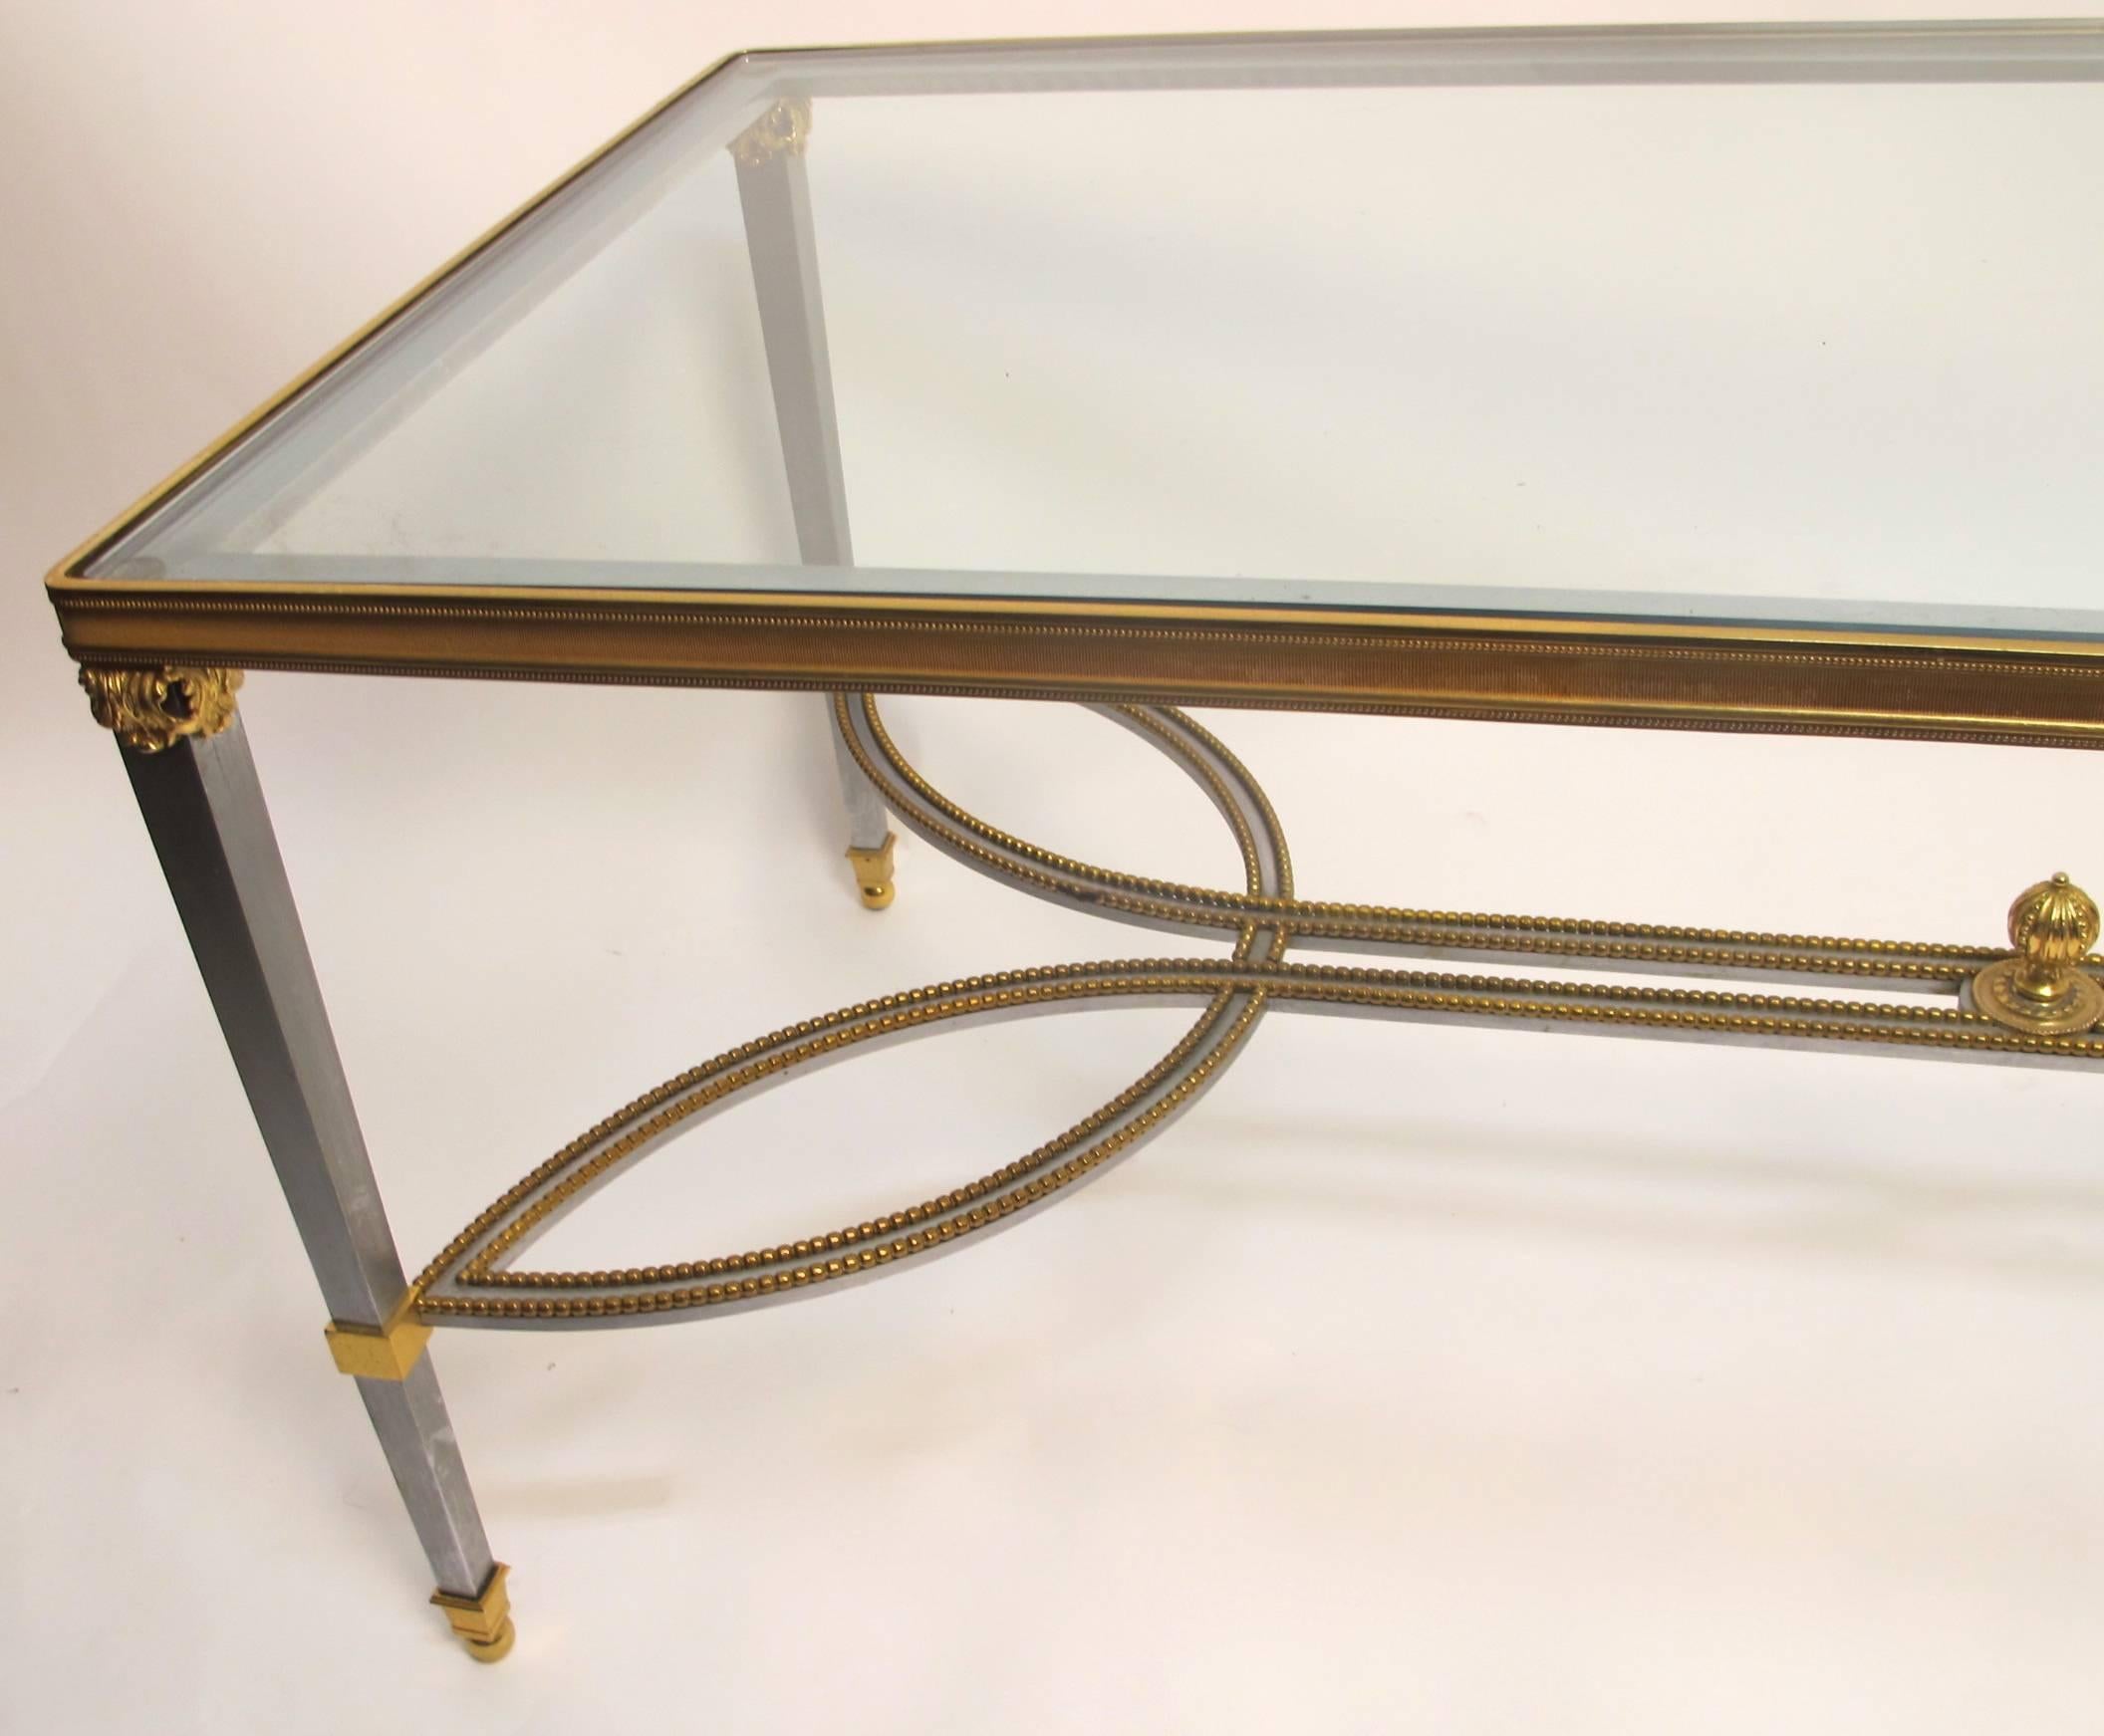 Neoclassical Revival style steel and gilt brass trim coffee table with inset glass top. This extremely well made piece has a number of interesting design features including a beaded detail and finial on its stretchers and an acanthus leaf capitol